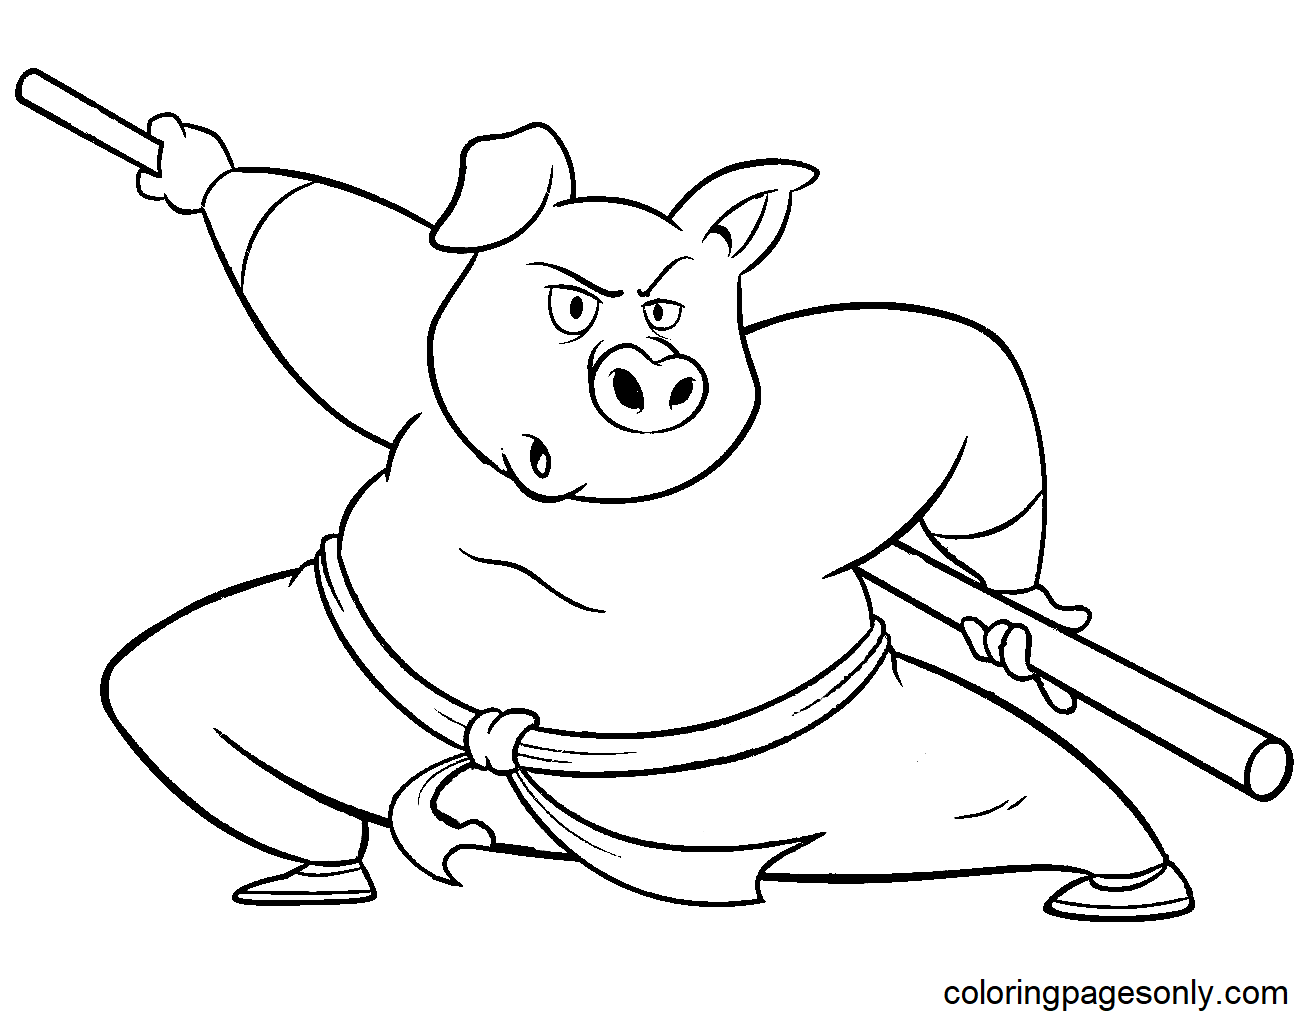 Cartoon Kung Fu Pig Coloring Pages